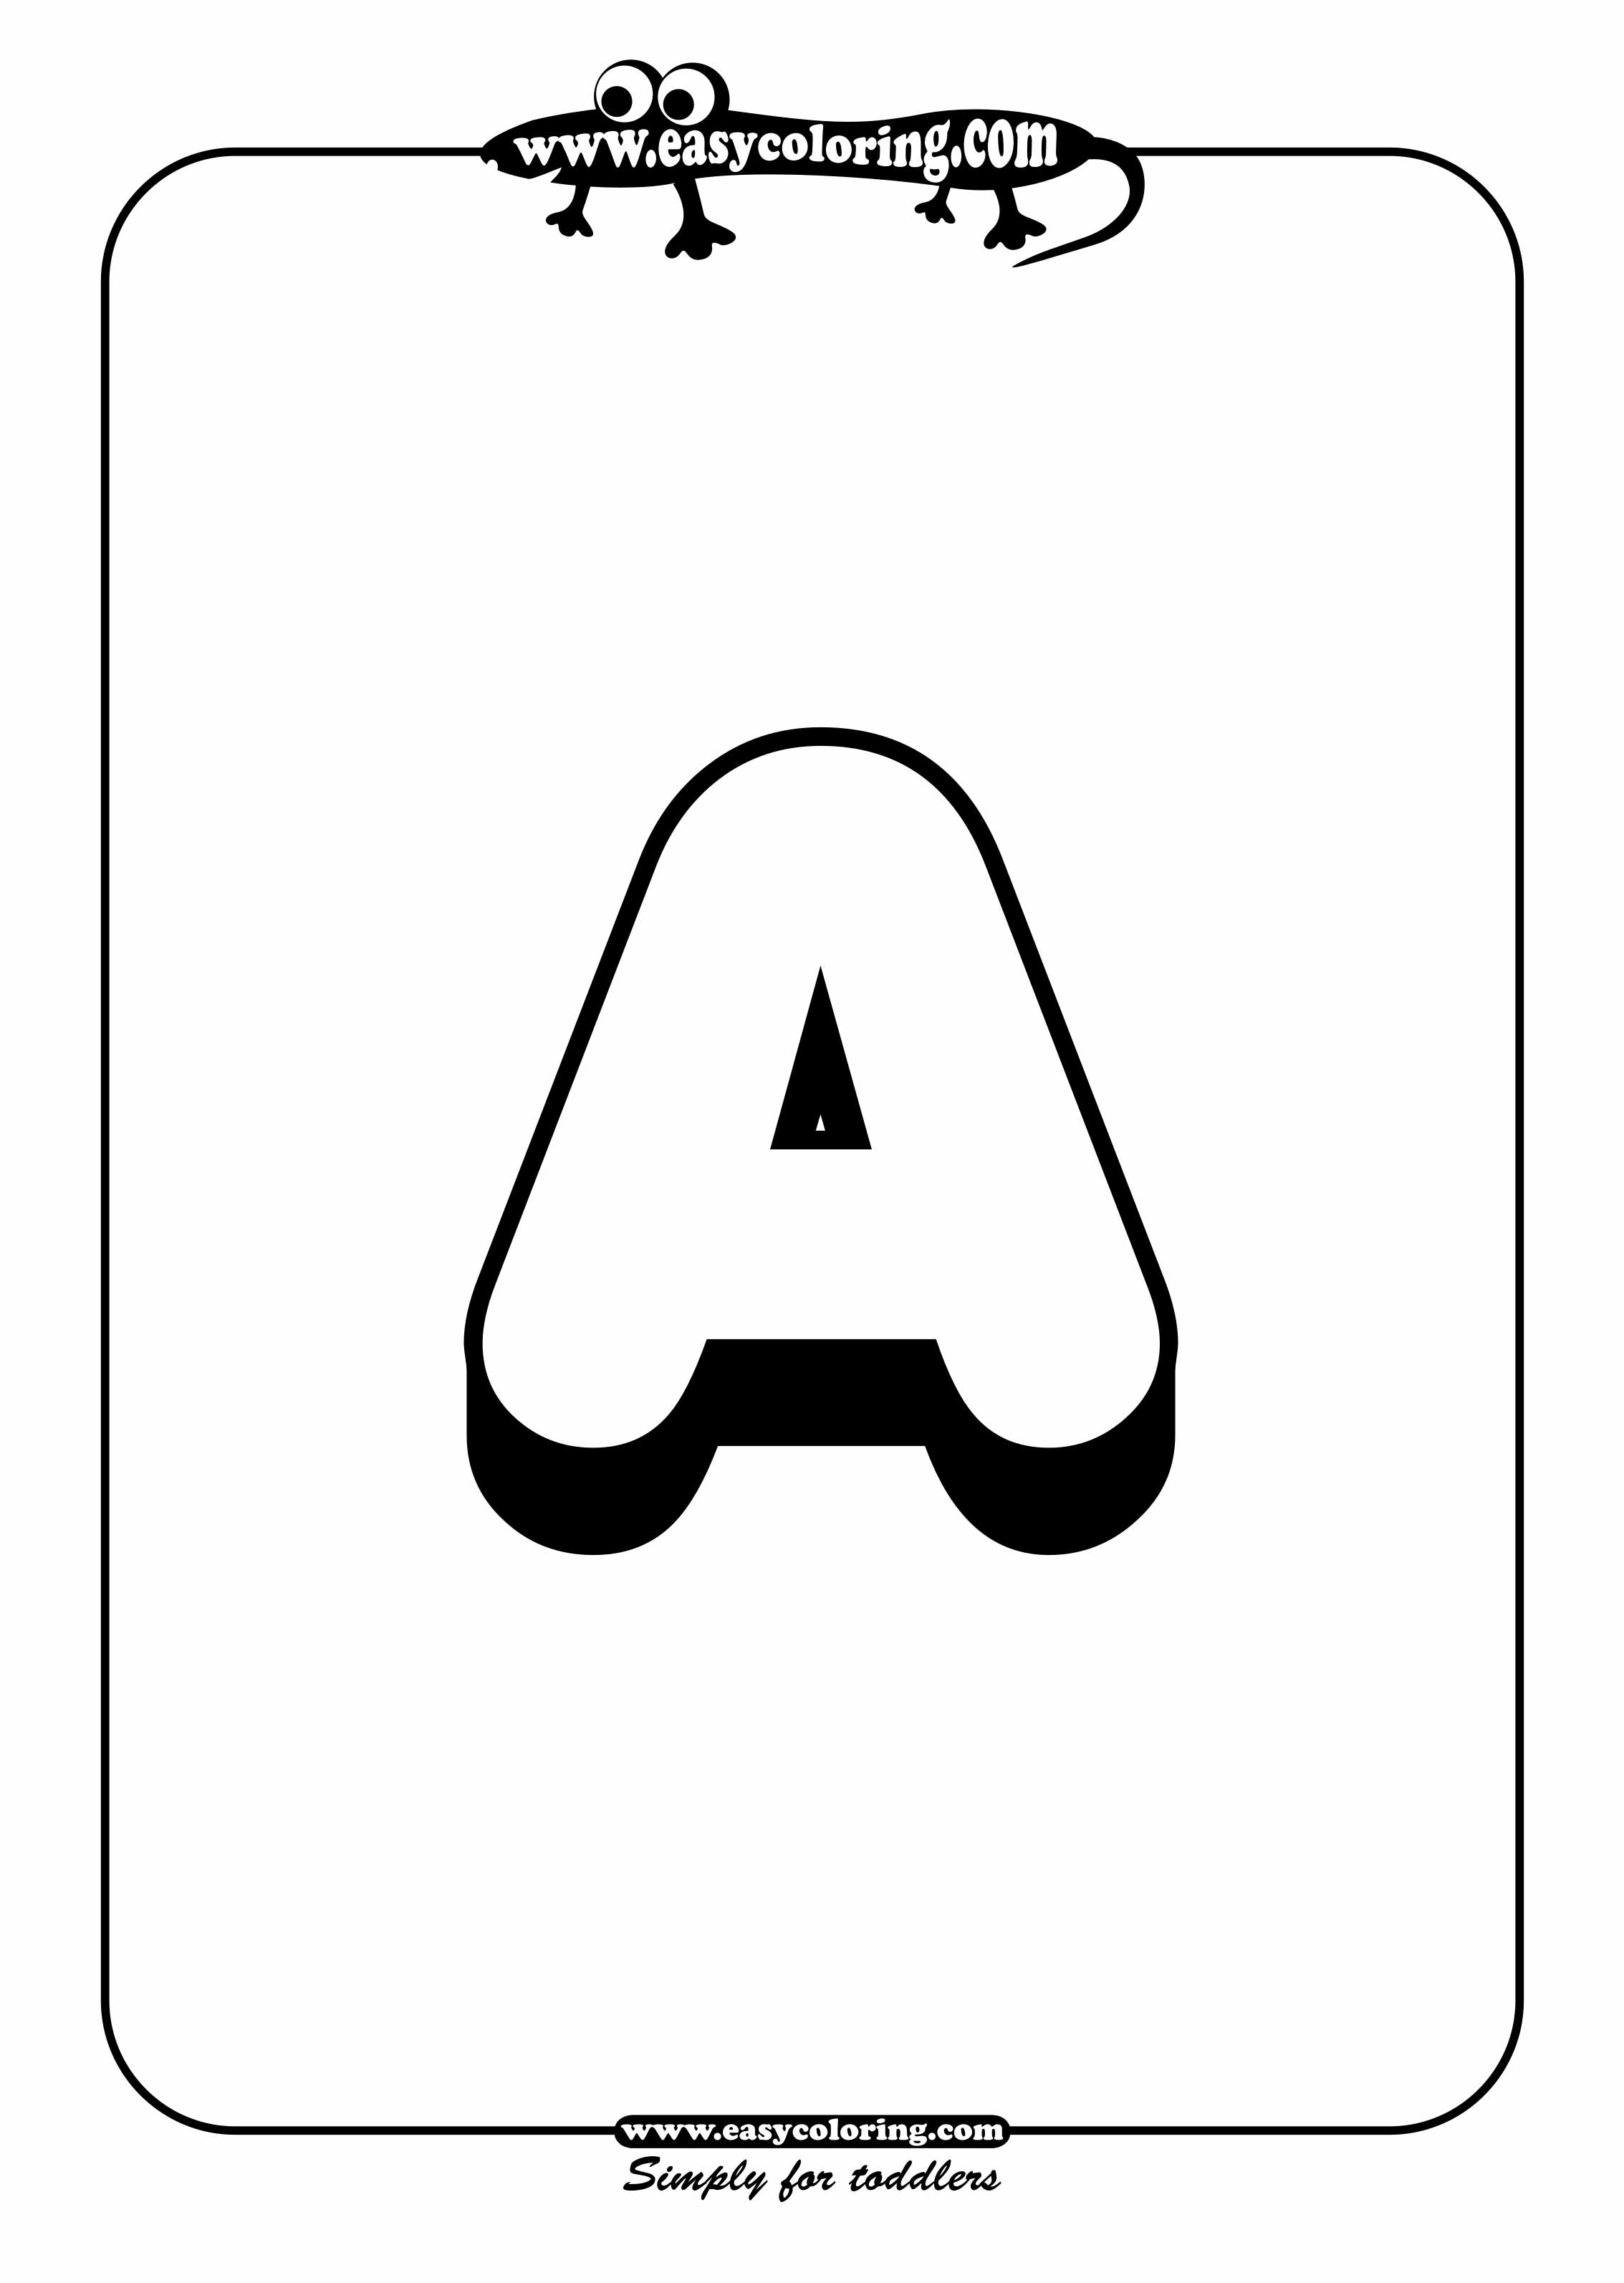 Big letter A - Simple alphabet | Easy coloring alphabet for toddlers